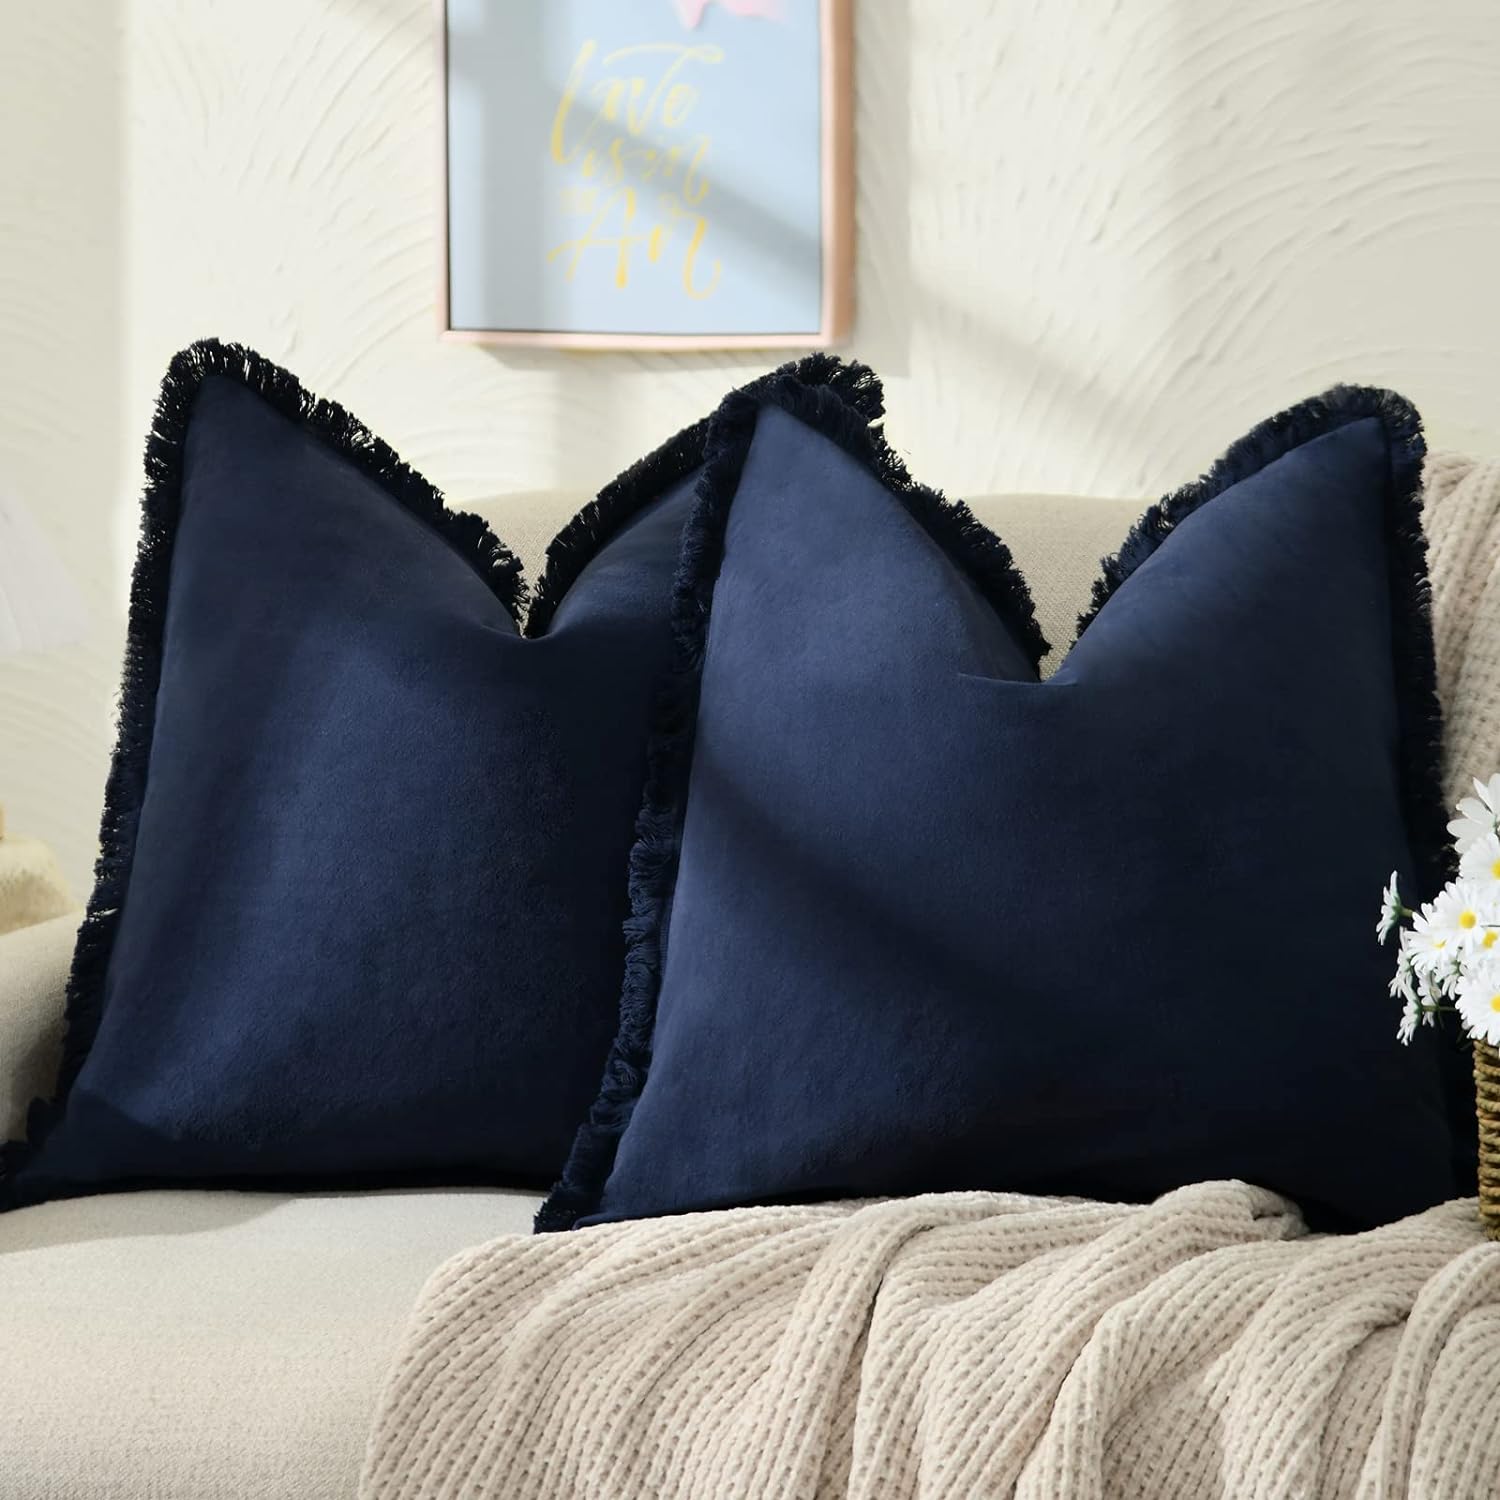 ZWJD Farmhouse Pillow Covers 22x22 Set of 2 Navy Throw Pillow Covers with Fringe Chic Cotton Decorative Pillows Square Cushion Covers for Sofa Couch Bed Living Room Boho Decor